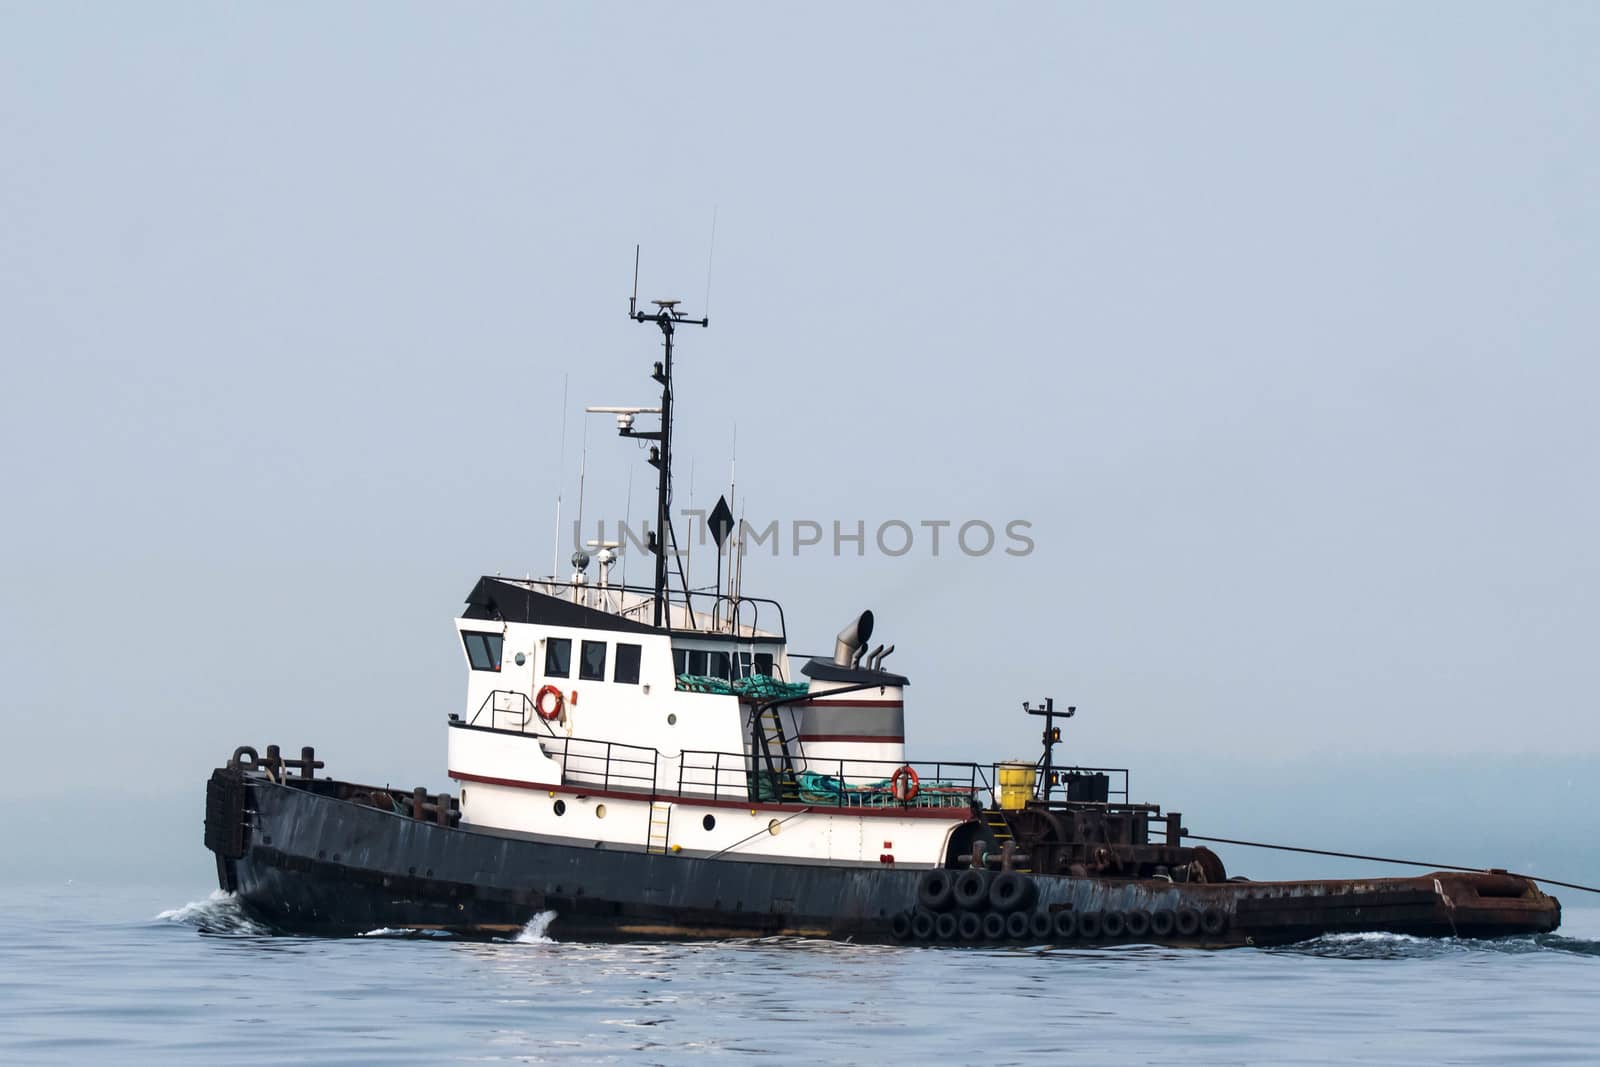 Ocean going tug on Puget Sound by cestes001